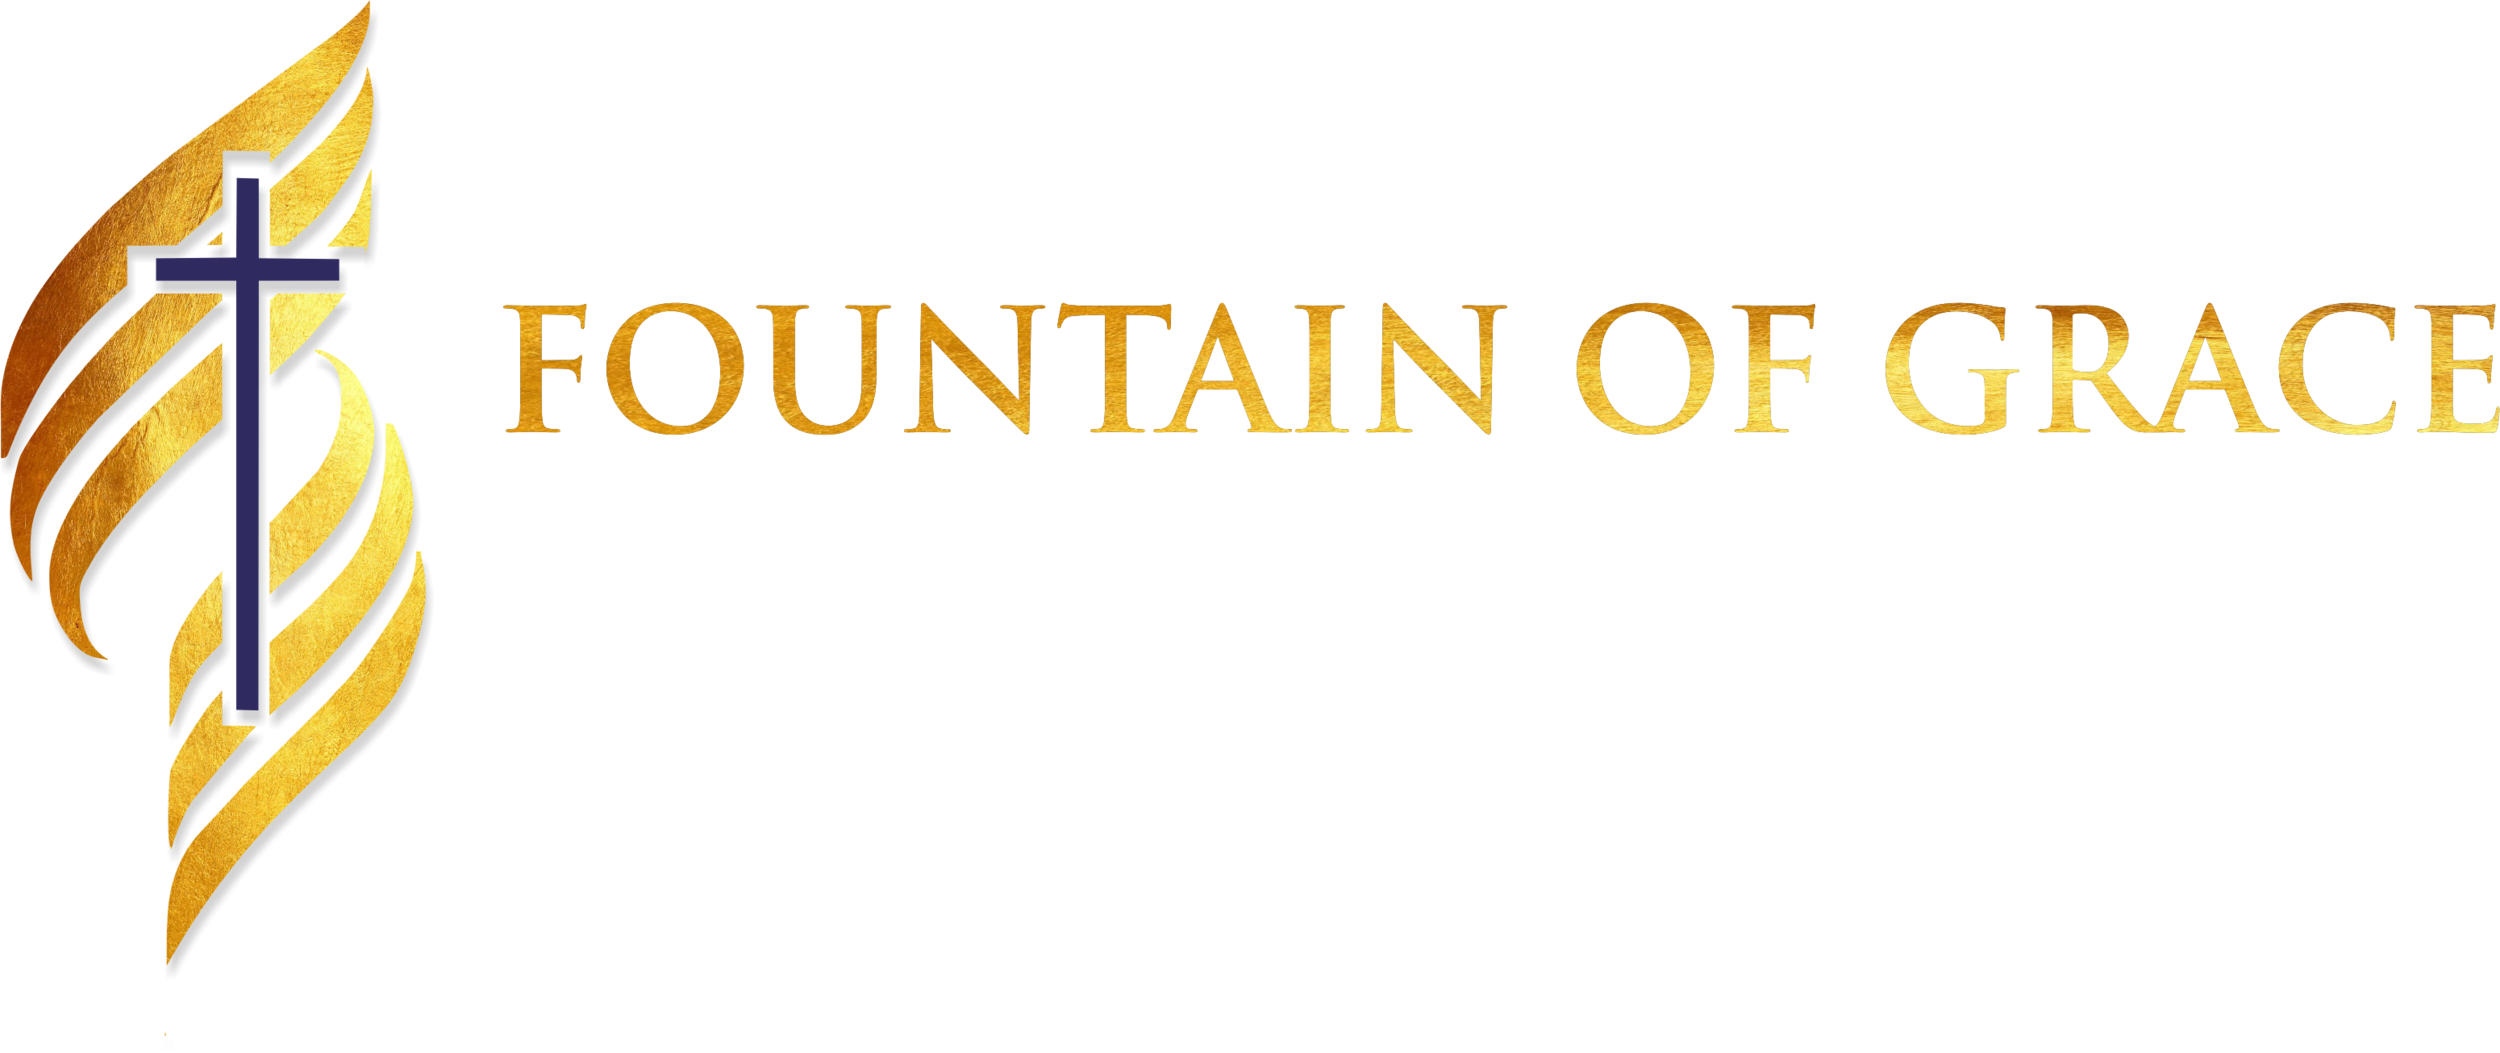 FOUNTAIN OF GRACE OFFICIAL LOGO 1.png